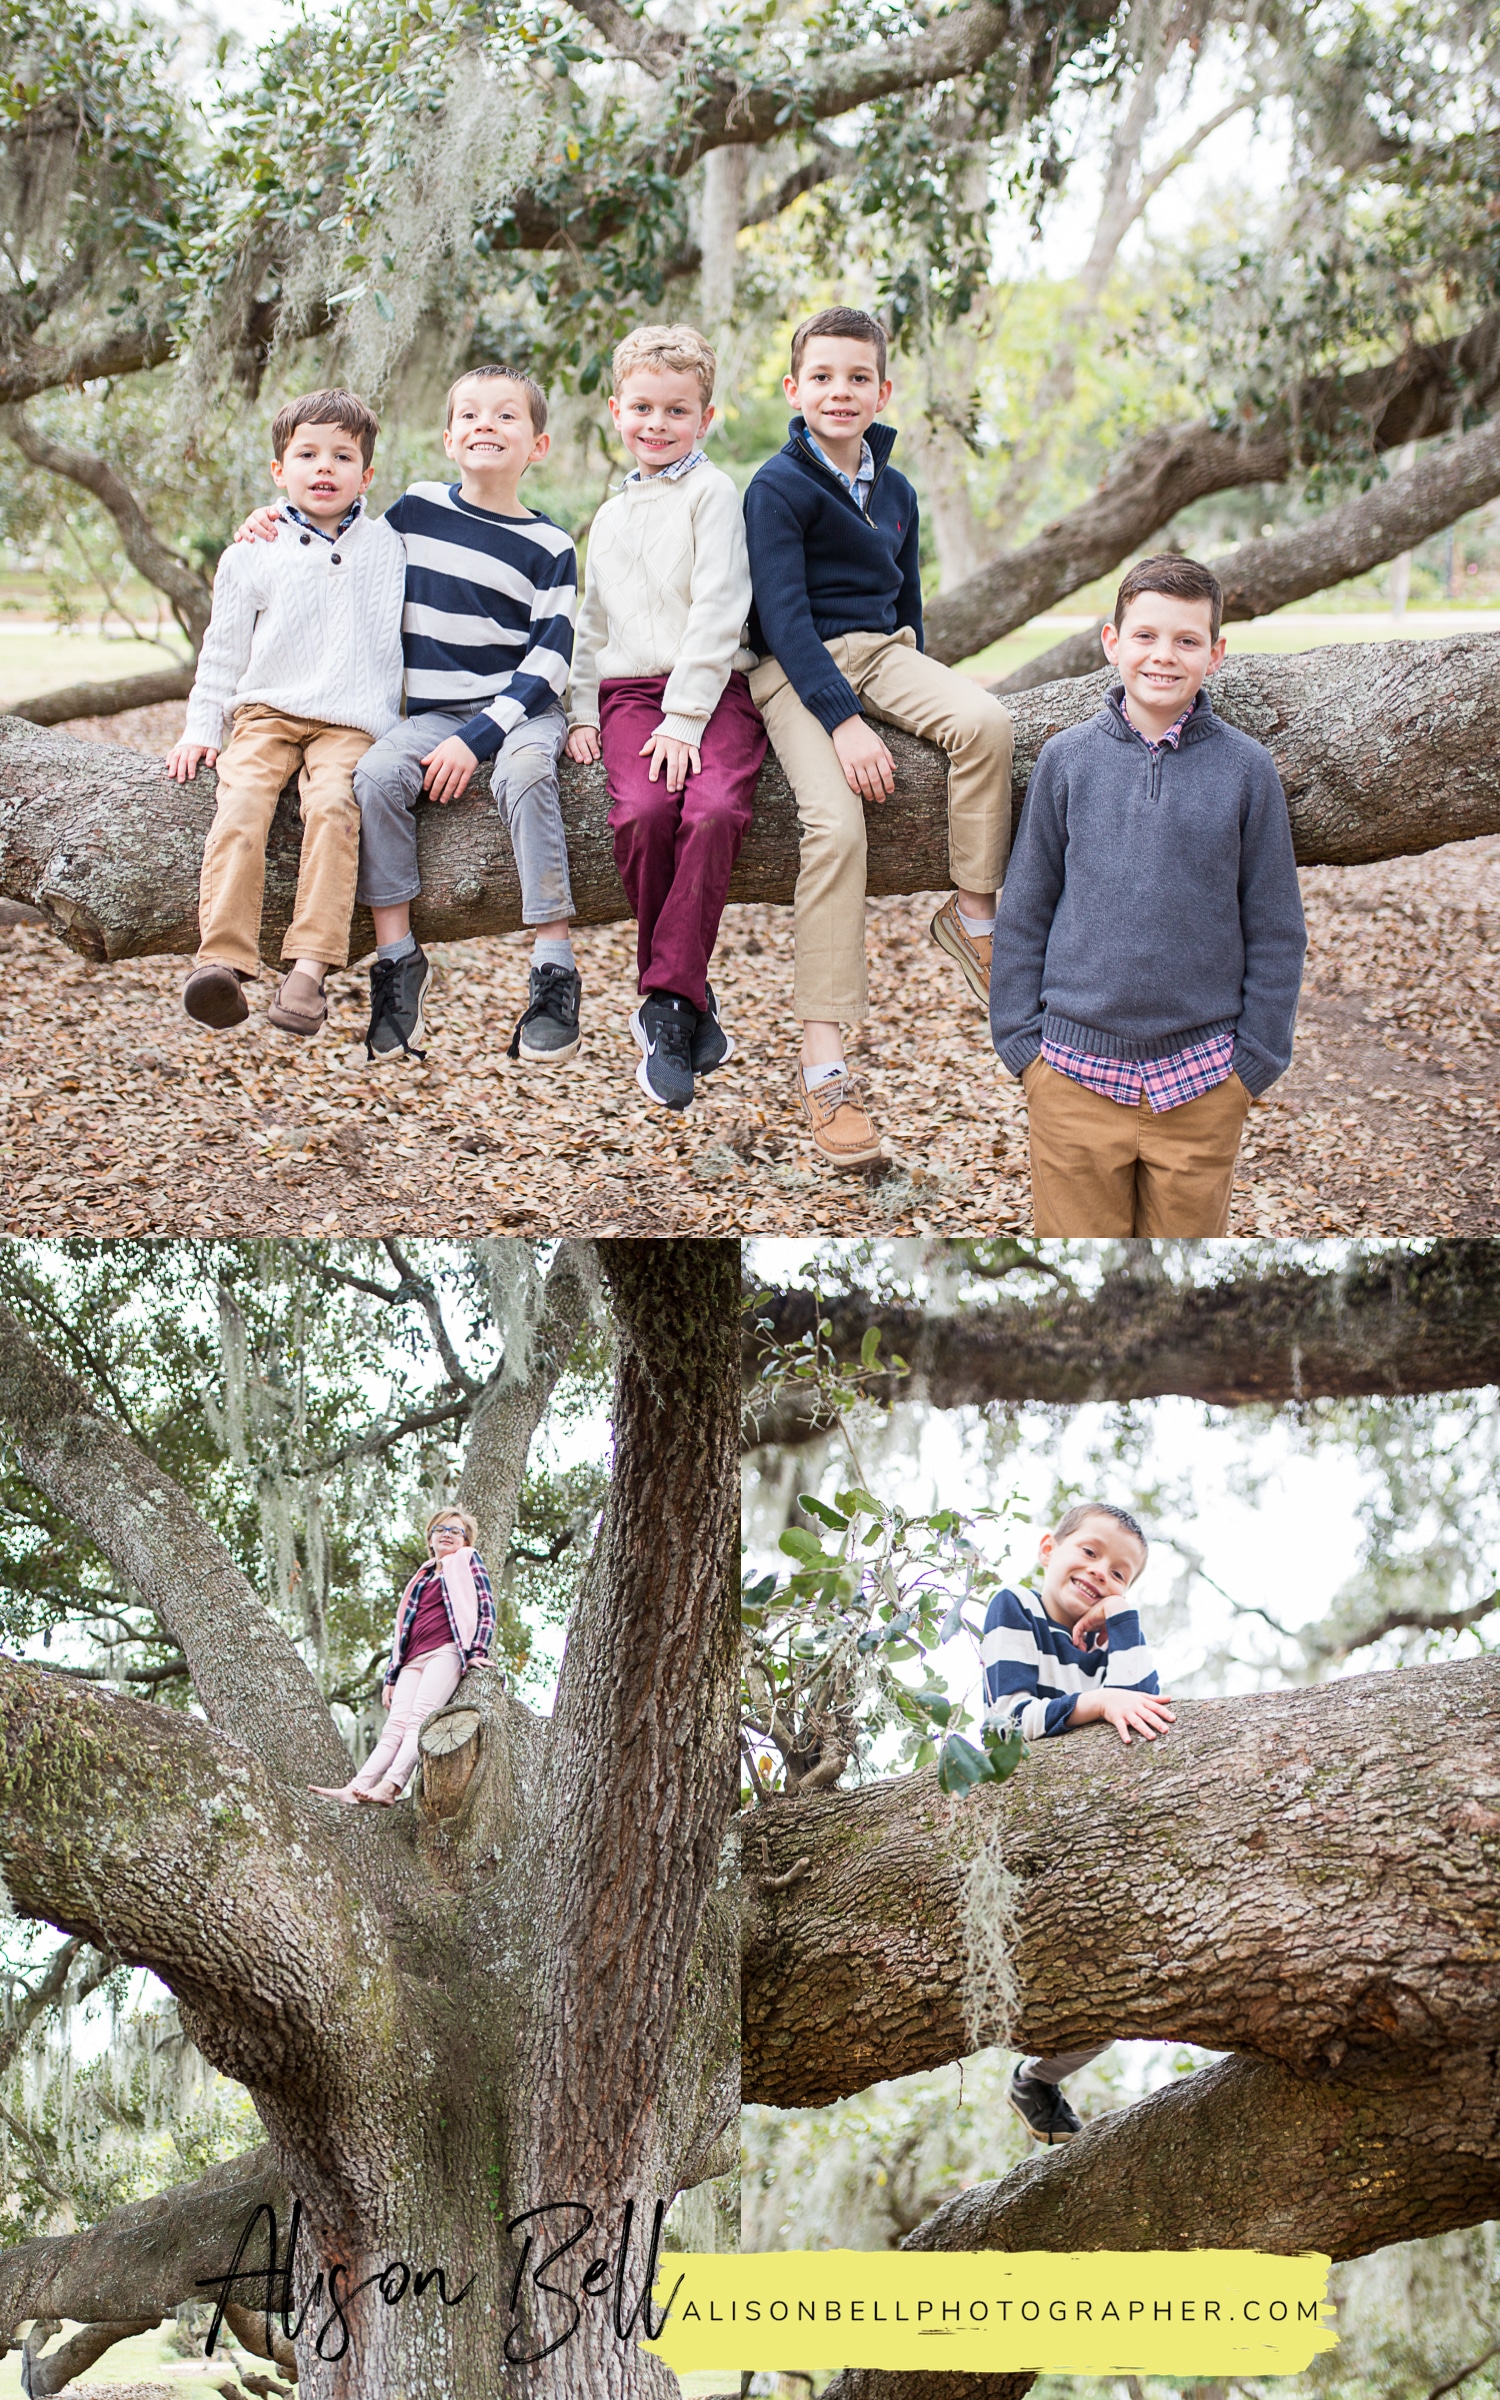 Extended family photography session in Hampton Park, Charleston South Carolina by Alison Bell, Photographer